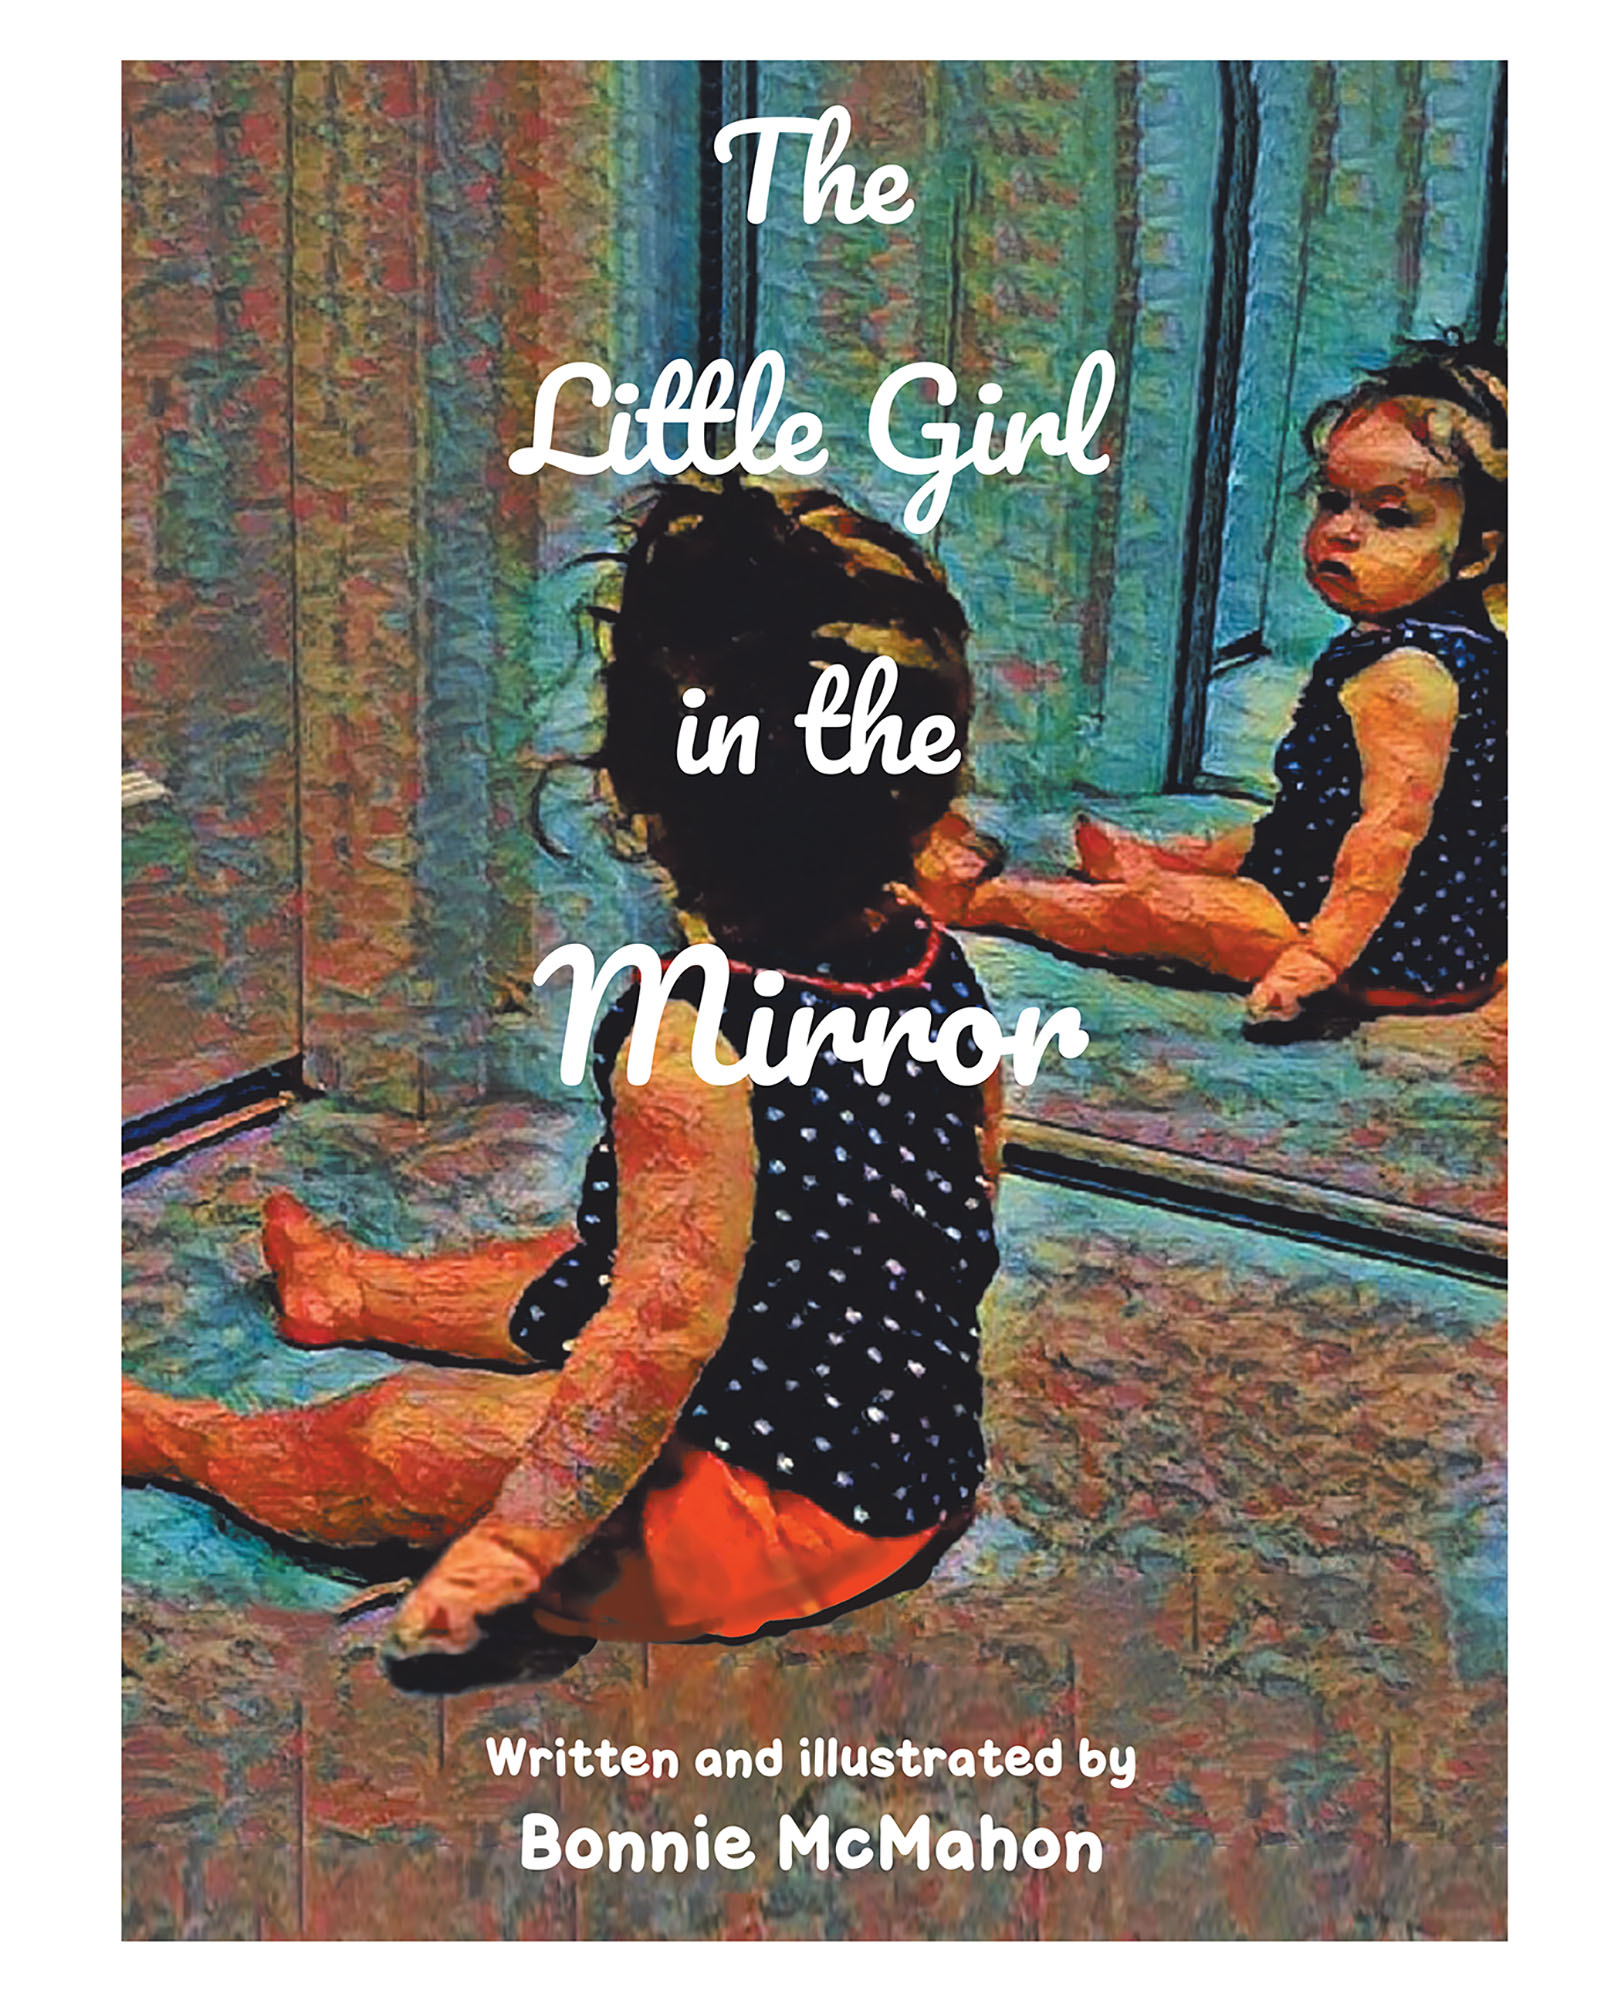 Bonnie Mcmahon S New Book The Little Girl In The Mirror Is A Lovely Piece About Self Appreciation And Confidence Newswire